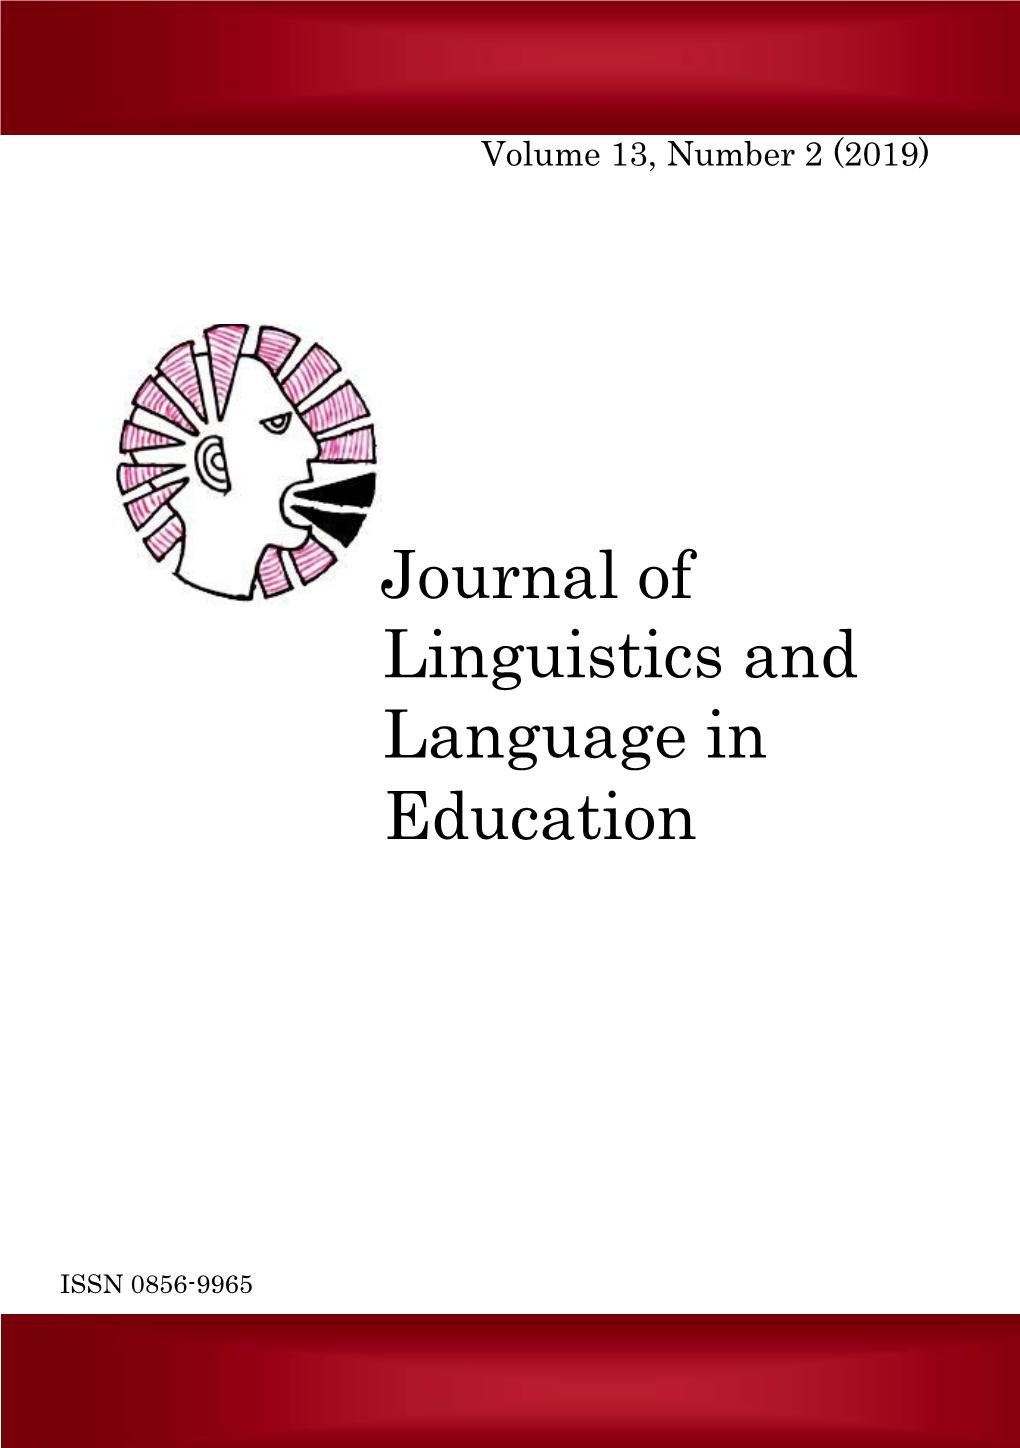 Journal of Linguistics and Language in Education Volume 13, Number 2 (2019)